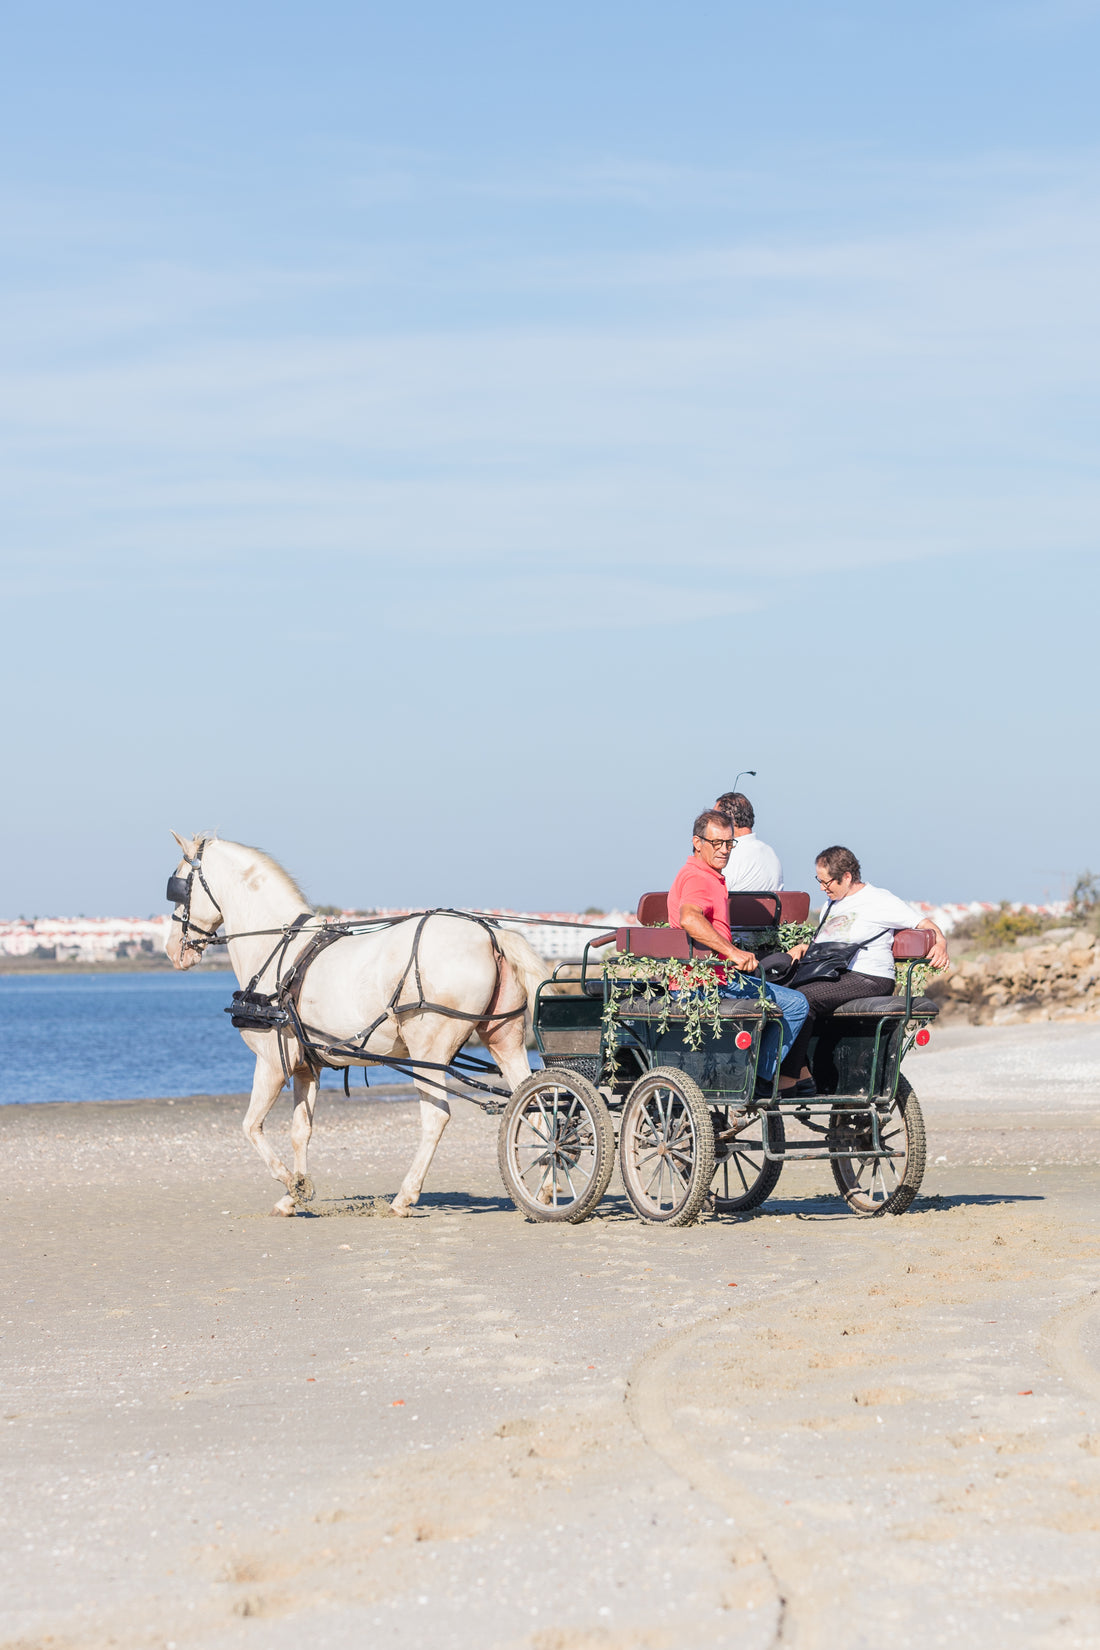 Digital Voucher • Ride in a buggy for 2 people